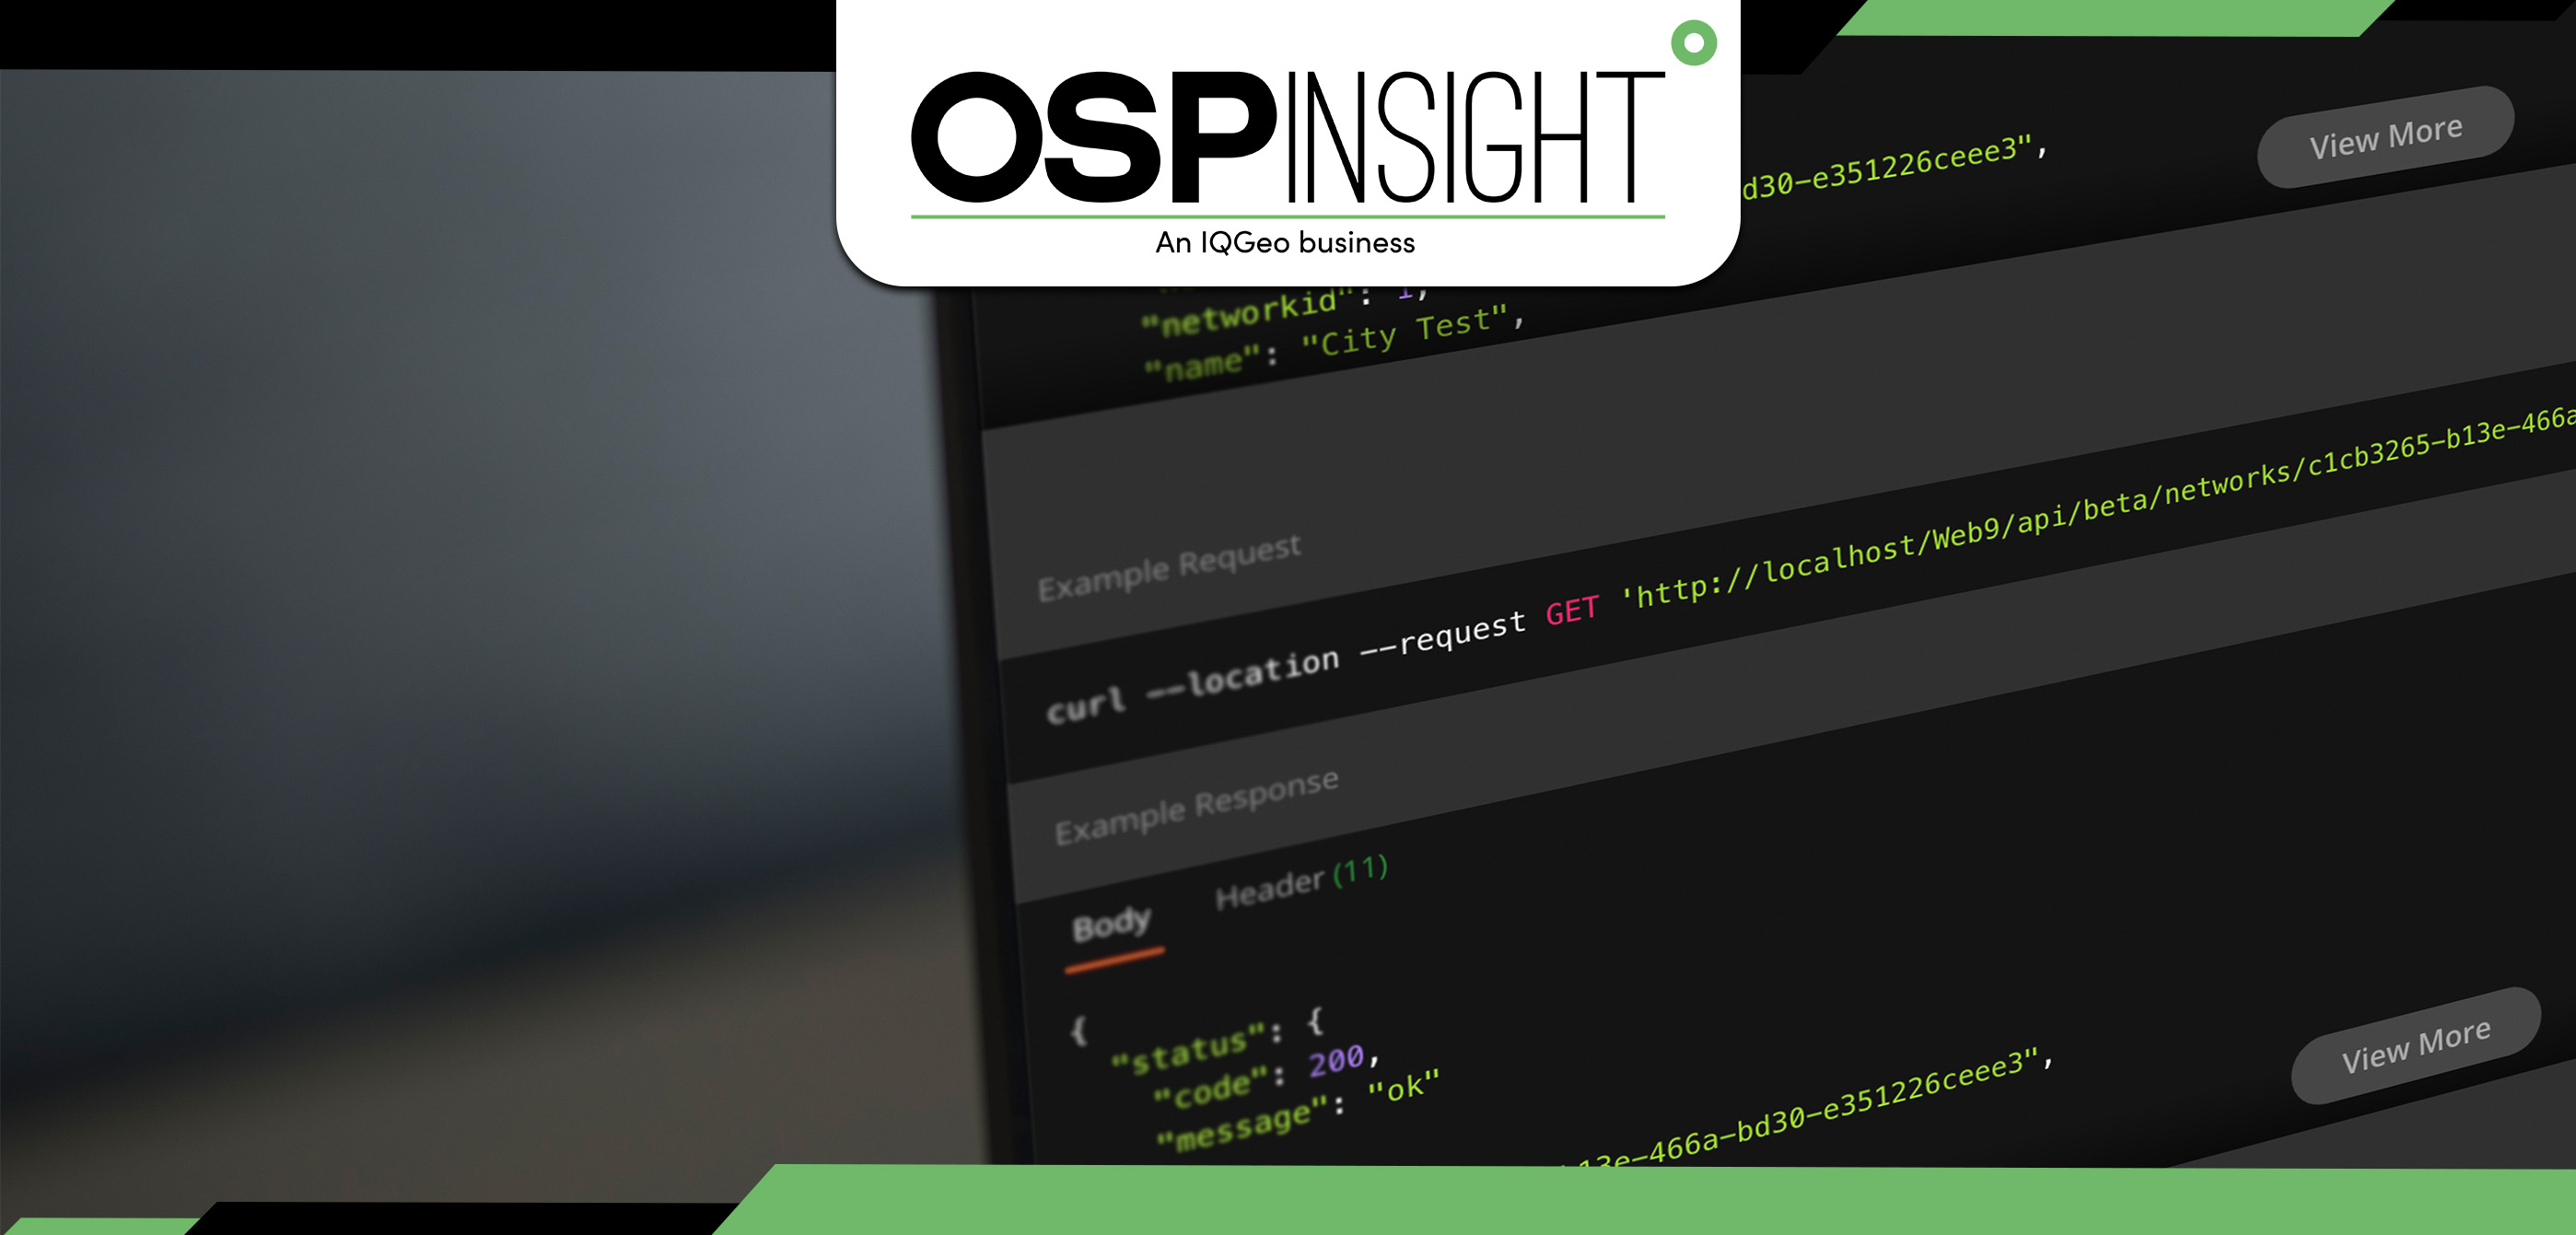 OSPI_Blog_The Open API Add-on - Extending the reach of OSPInsight_featured image